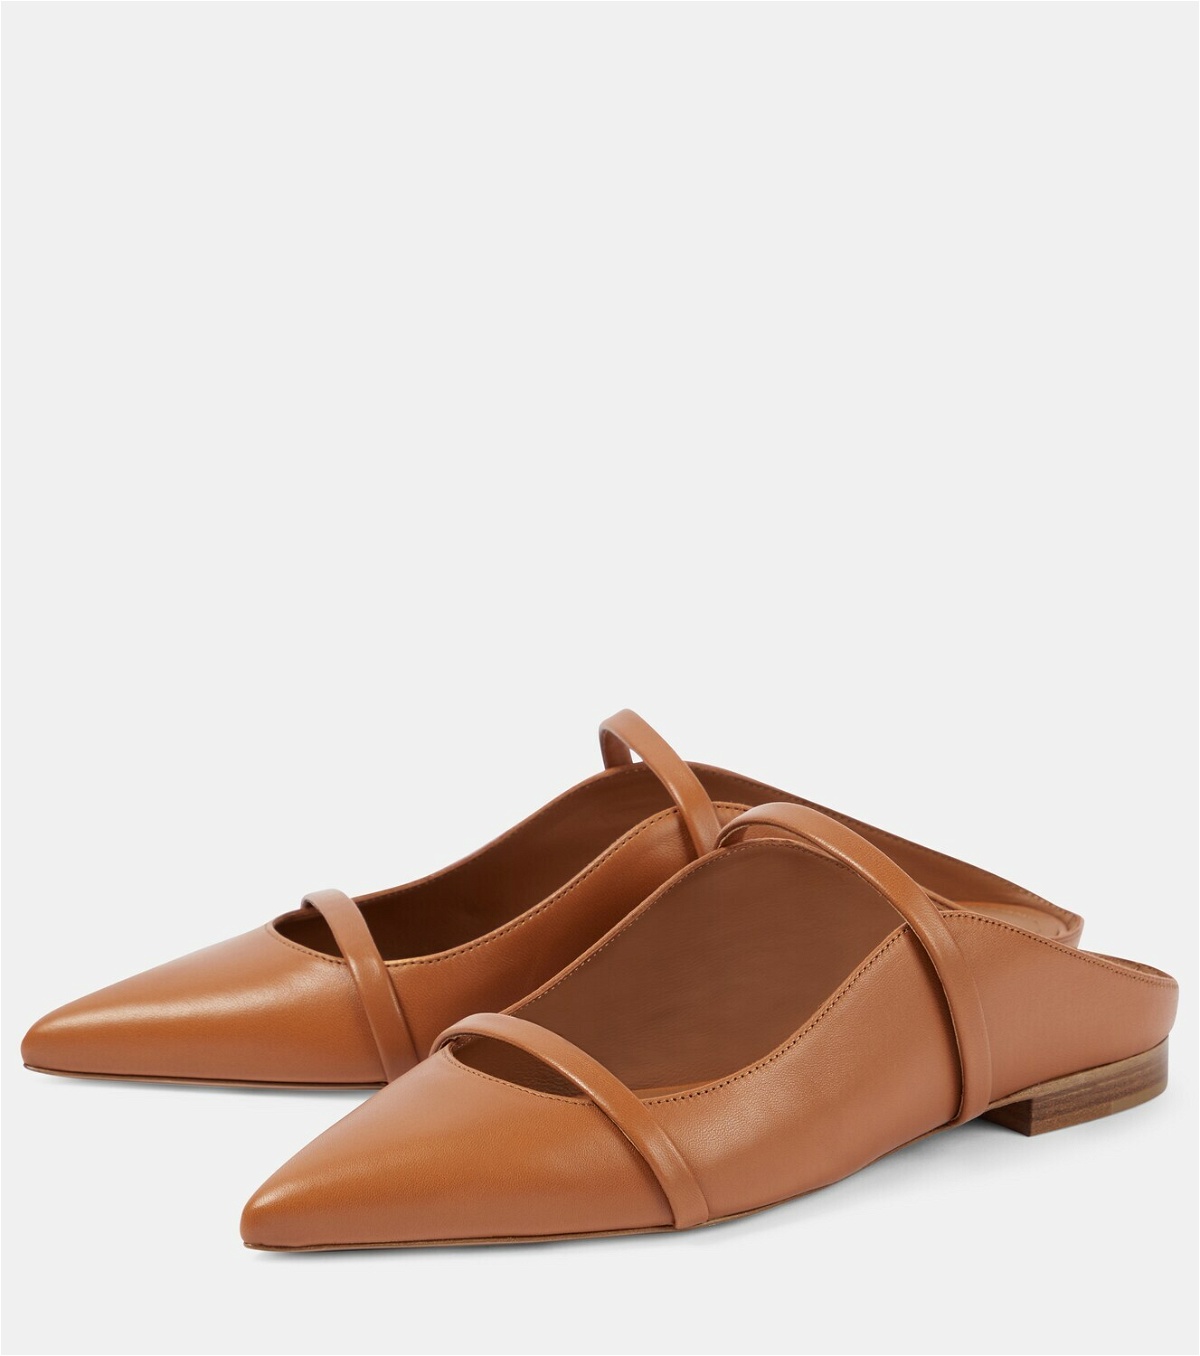 Malone Souliers Maureen leather ballet flats Malone Souliers